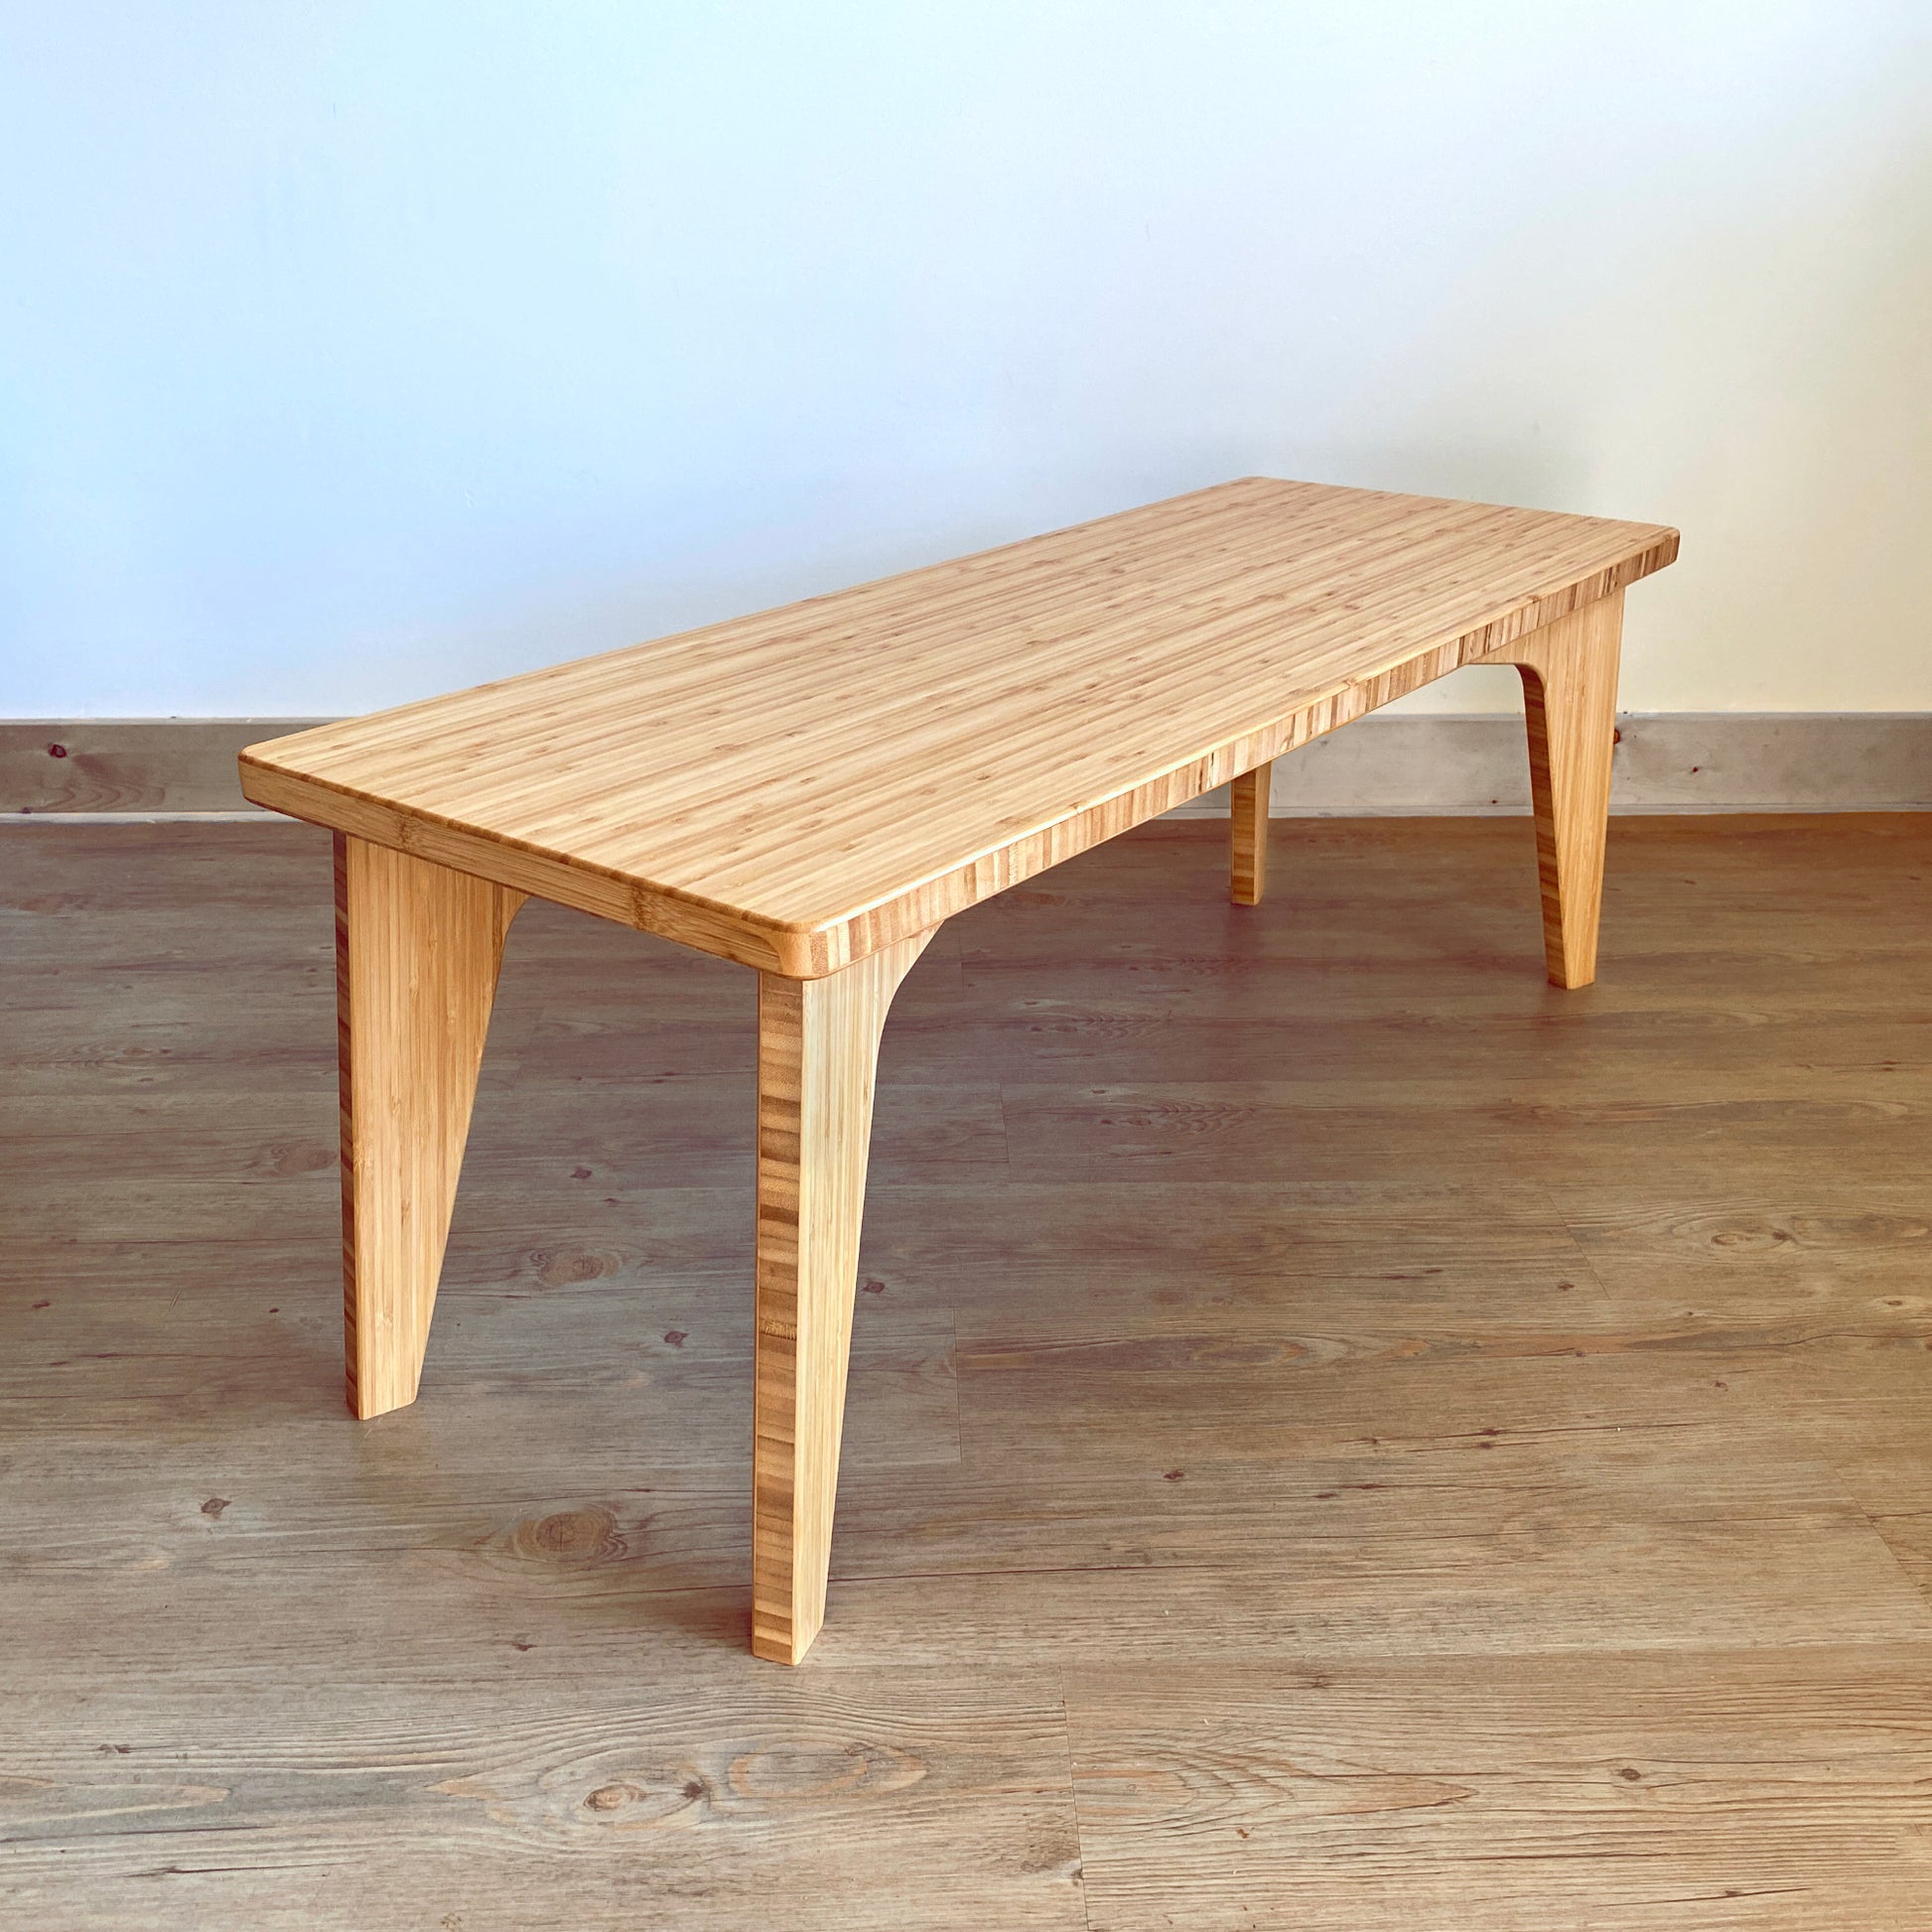 Natural bamboo computer desk. Japanese, mid-century, Scandinavian and contemporary inspired. Sustainable wood alternative, made from solid grass